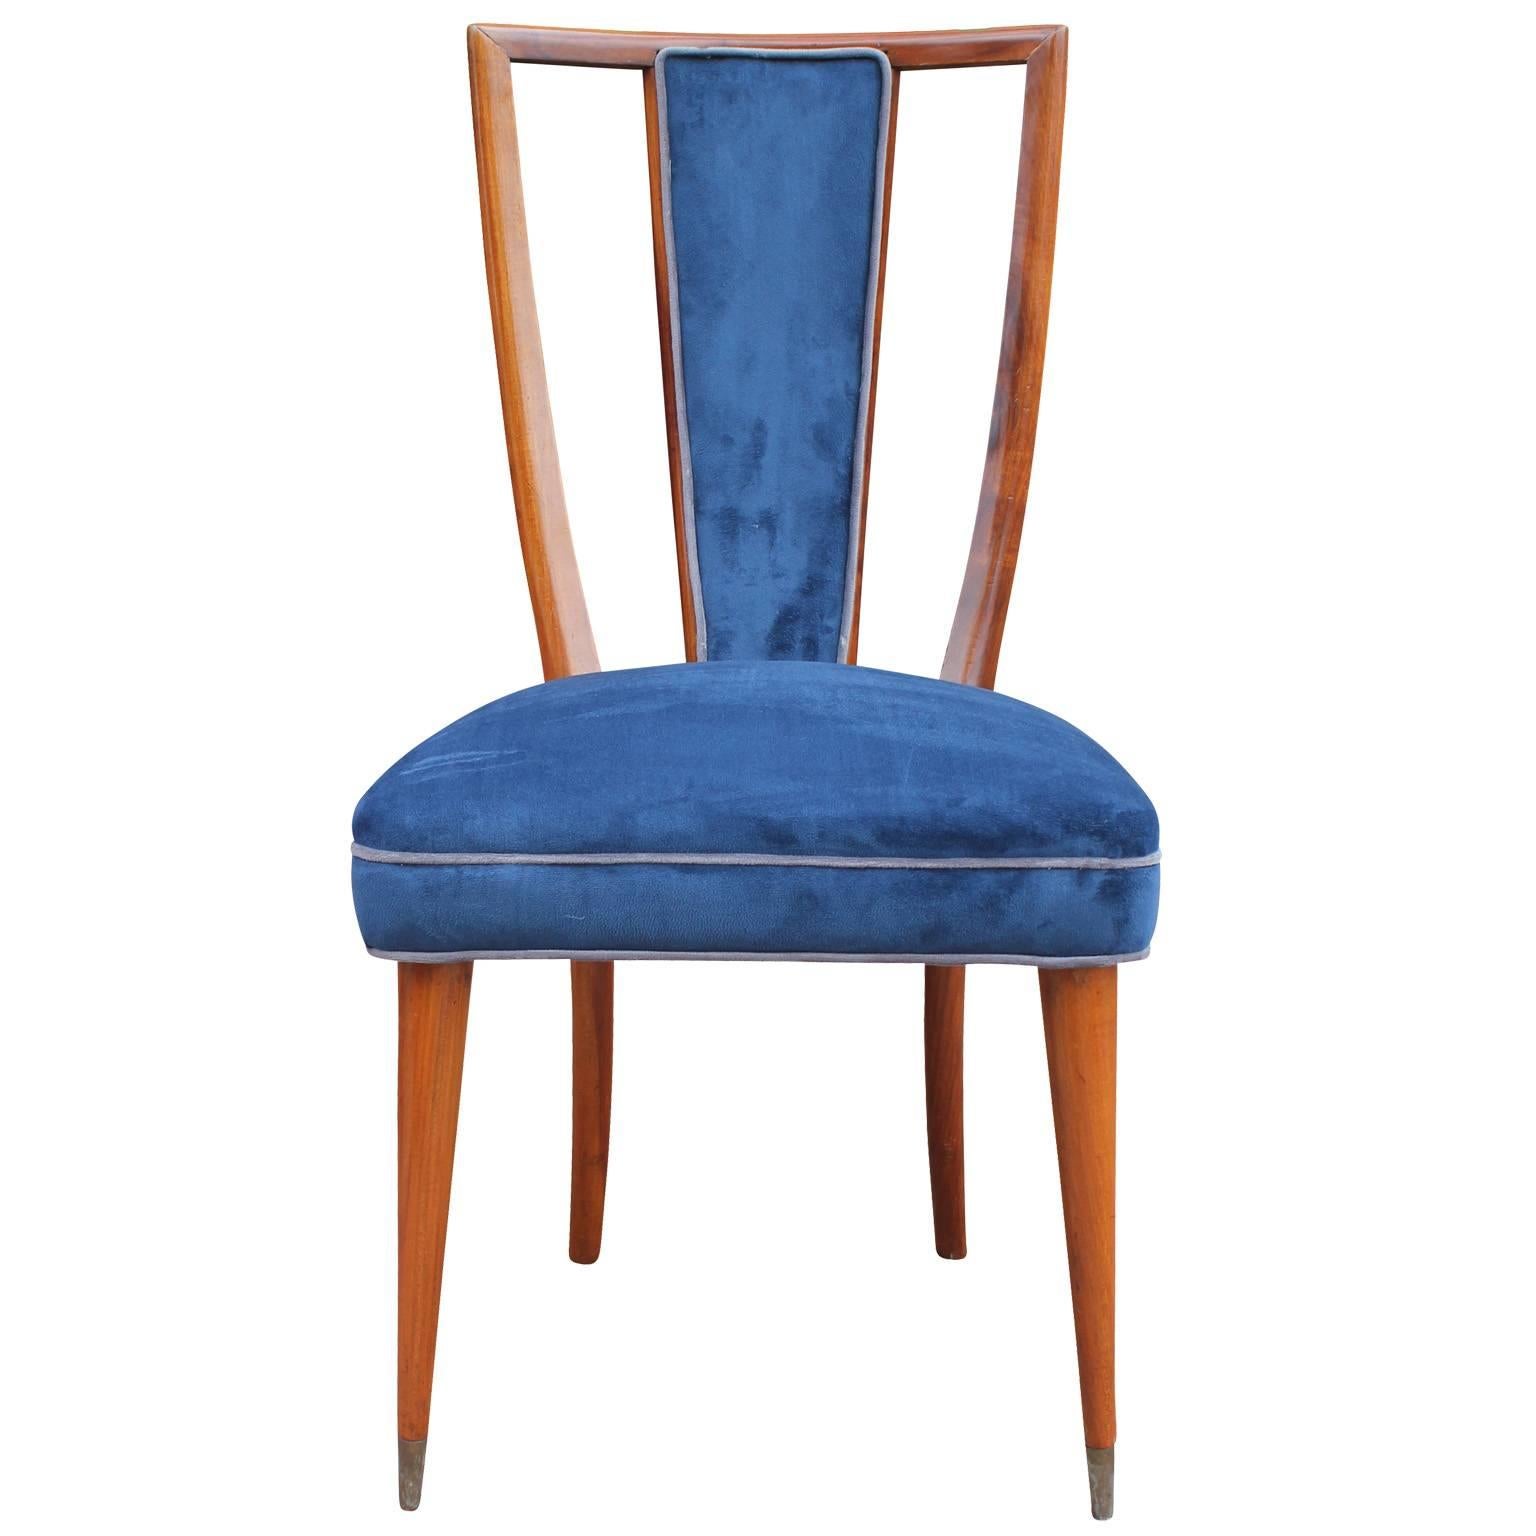 Wonderful set of 6 high backed dining chairs. Medium walnut colored frames have elegant lines and lovely negative space. Chairs are currently upholstered in a blue velvet which could use updating. We believe the chairs are French or Italian. One